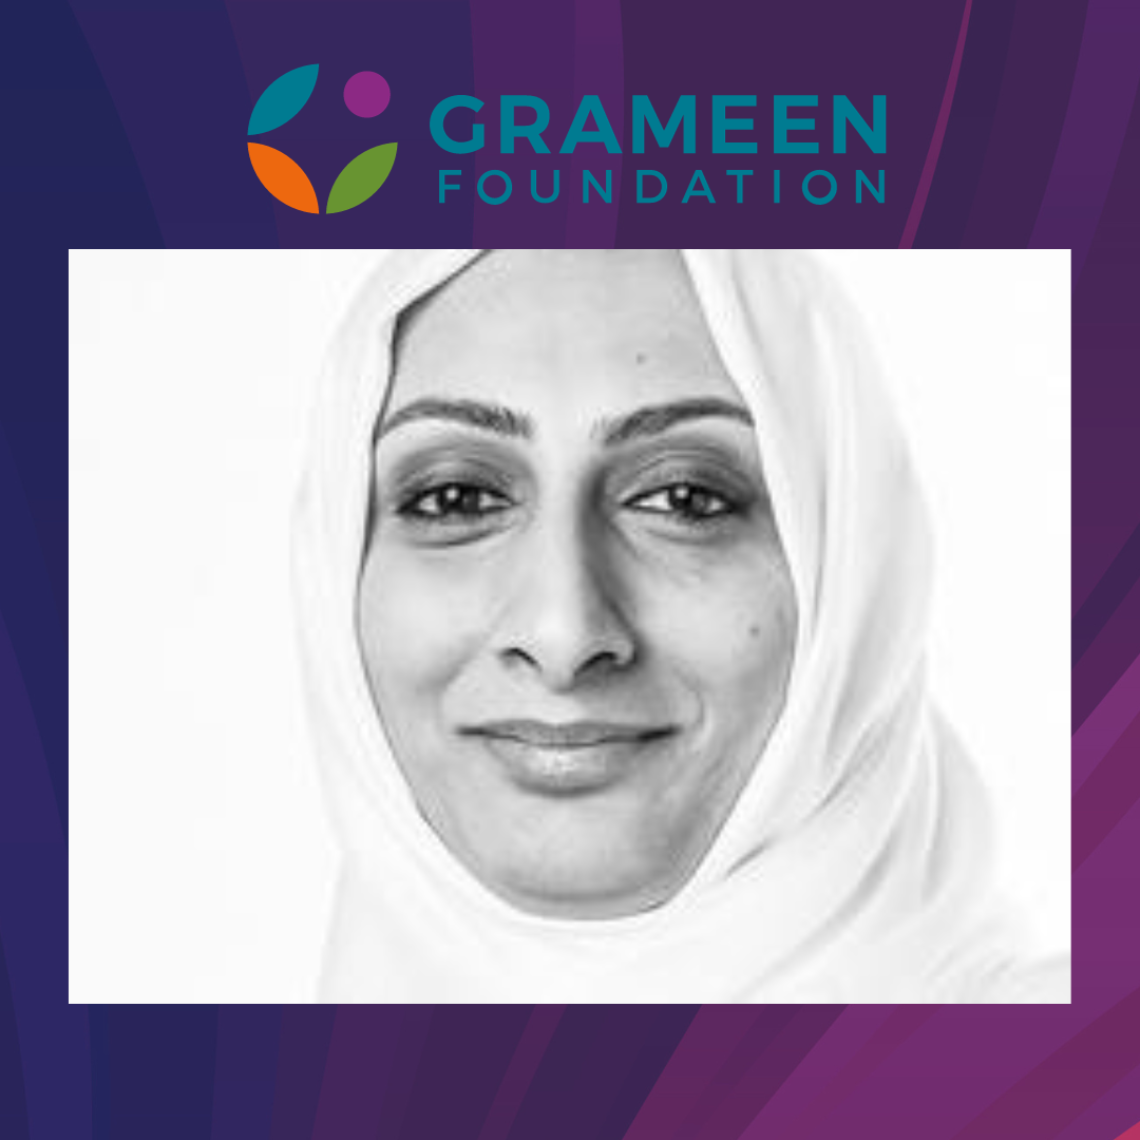 Grameen President and CEO Zubaida Bai is shown. The image is a headshot of Zuabida and she is wearing a white headscarf. The image is in black and white